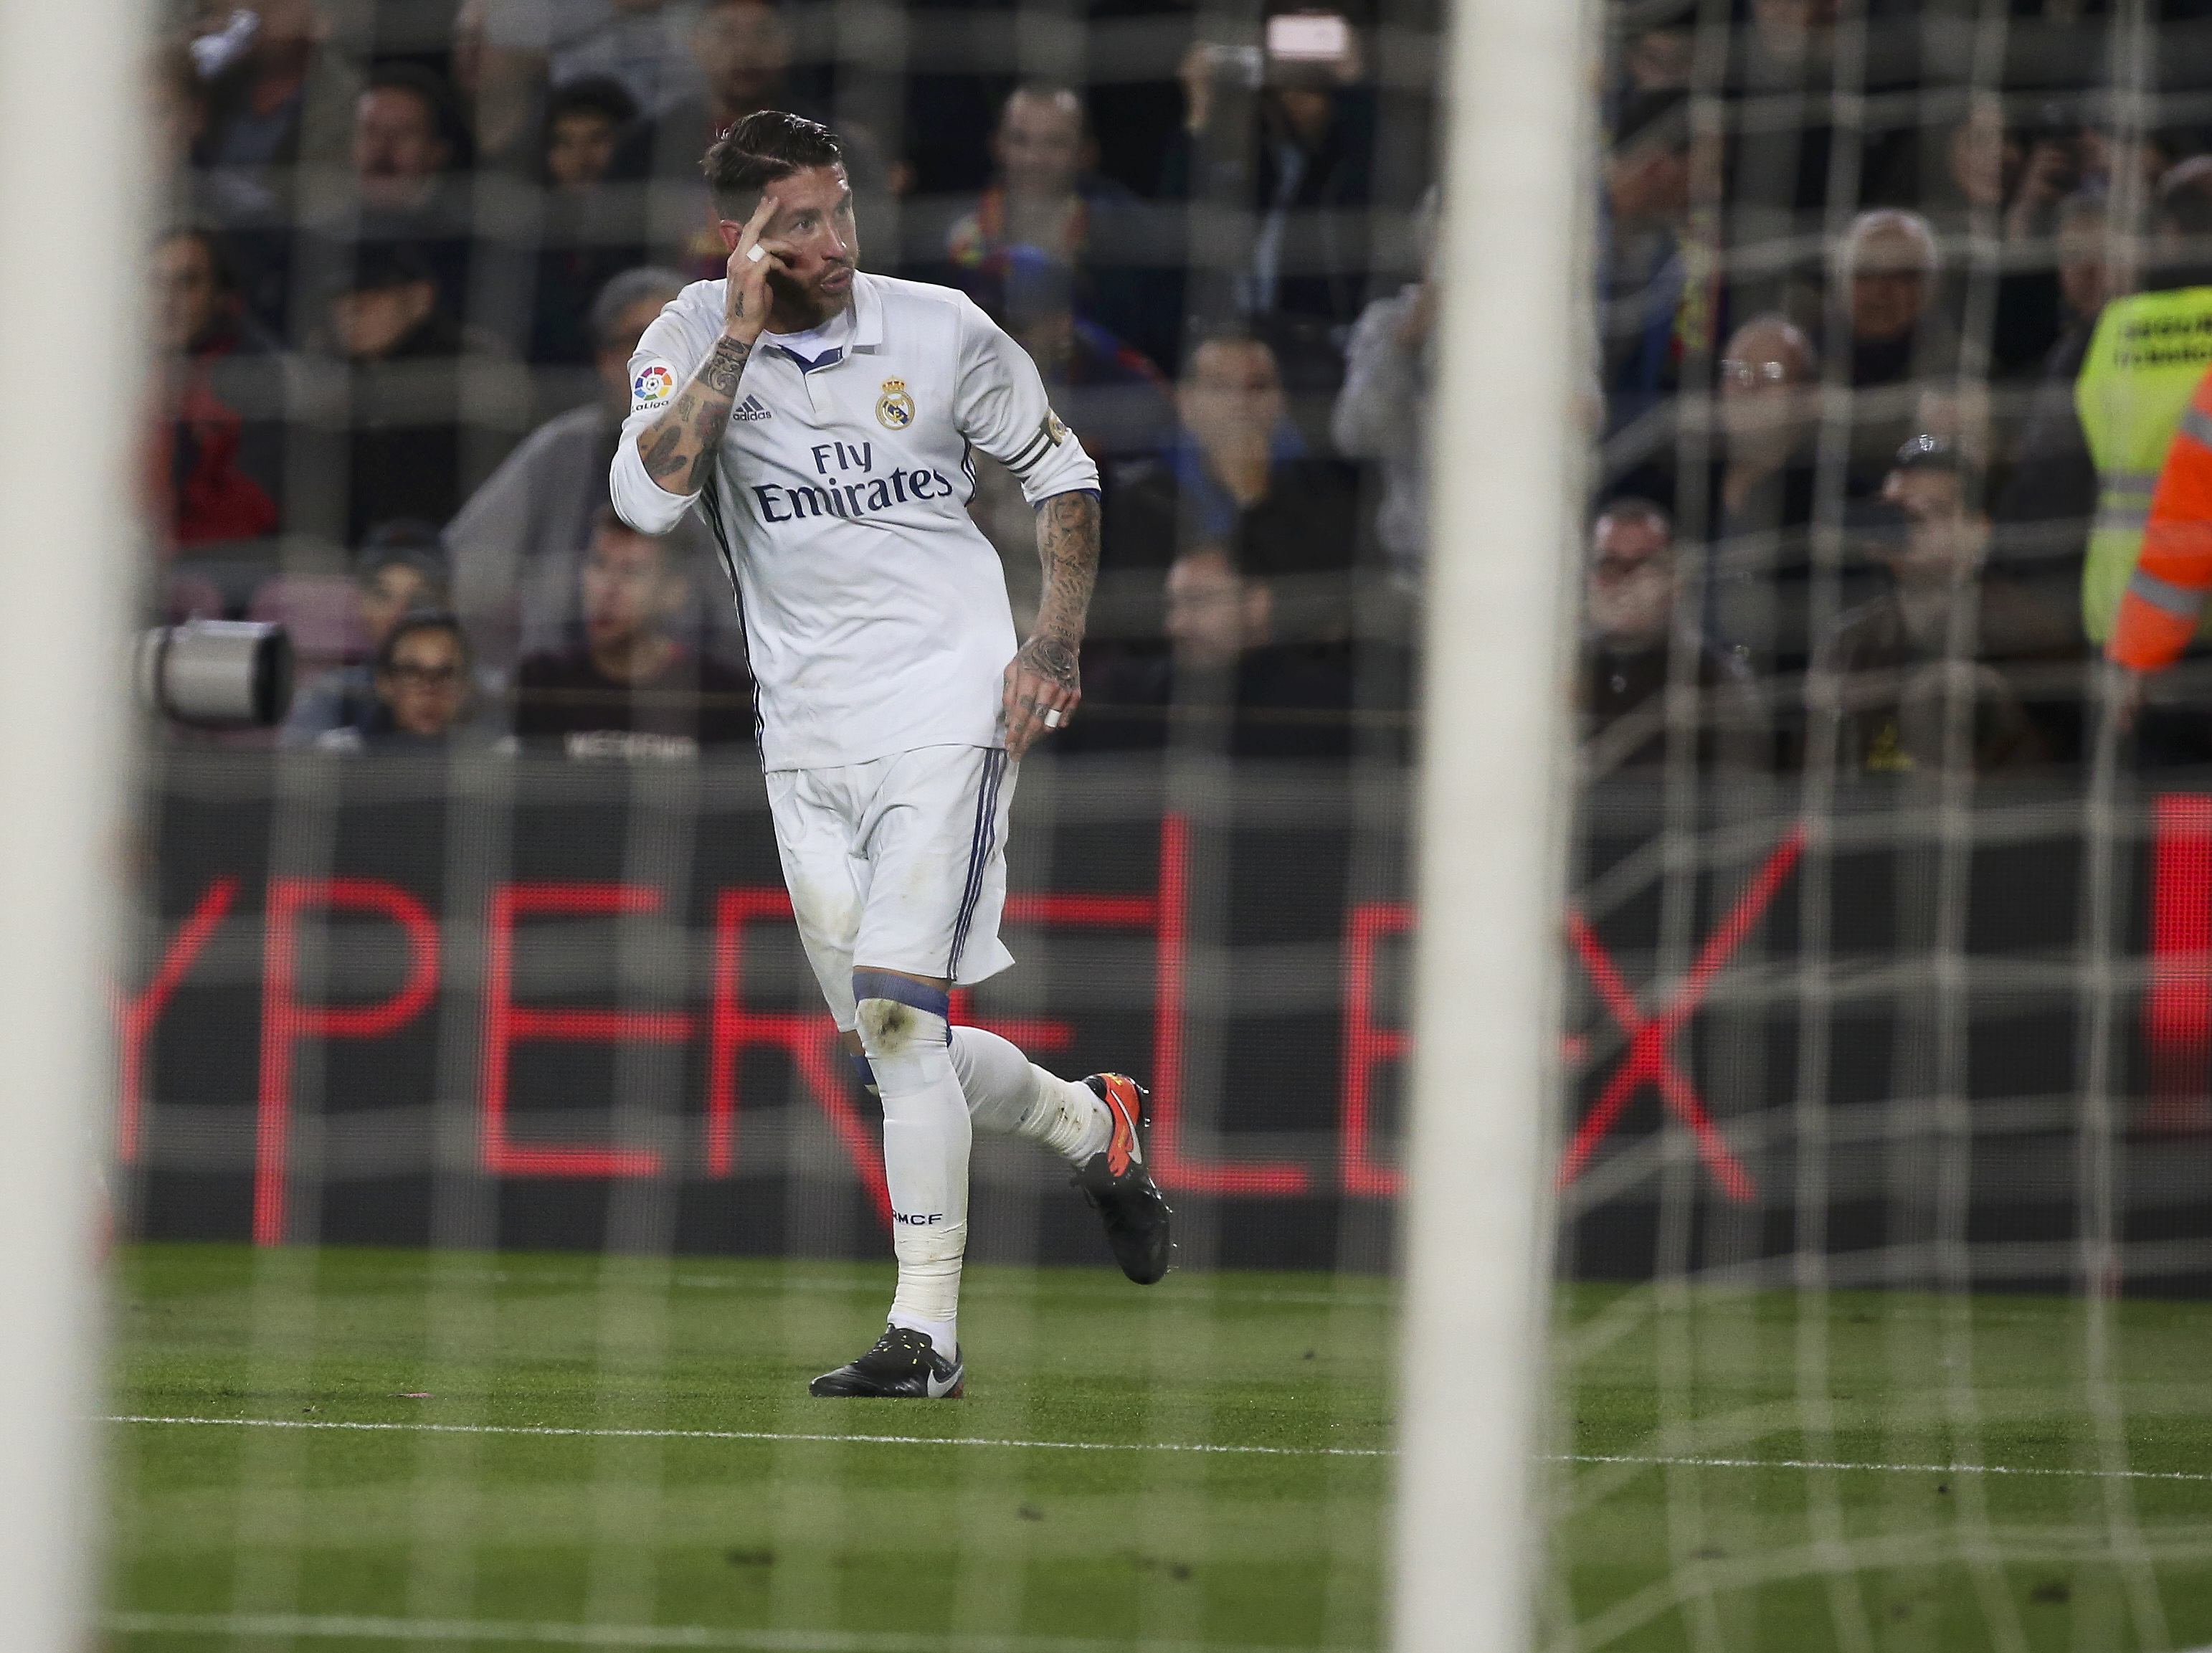 real madrid 039 s sergio ramos celebrates after scoring a goal during the quot clasico quot on saturday december 3 2016 photo reuters